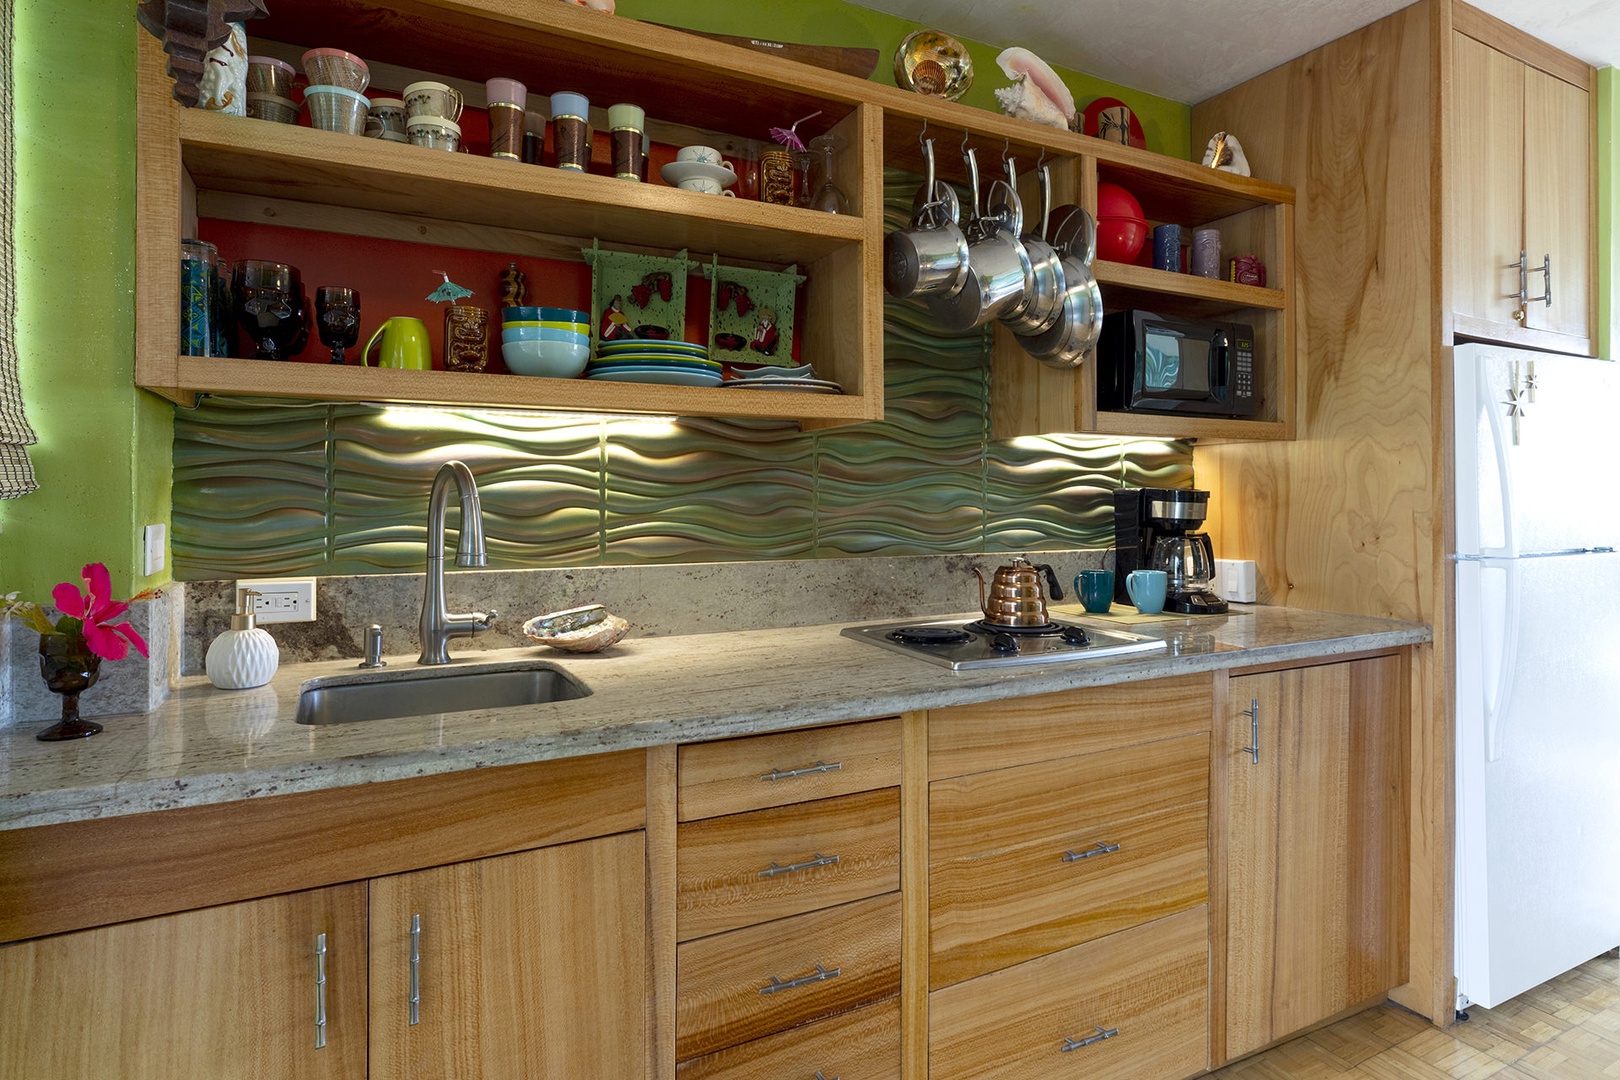 The kitchen offers efficiency and all the comforts of home